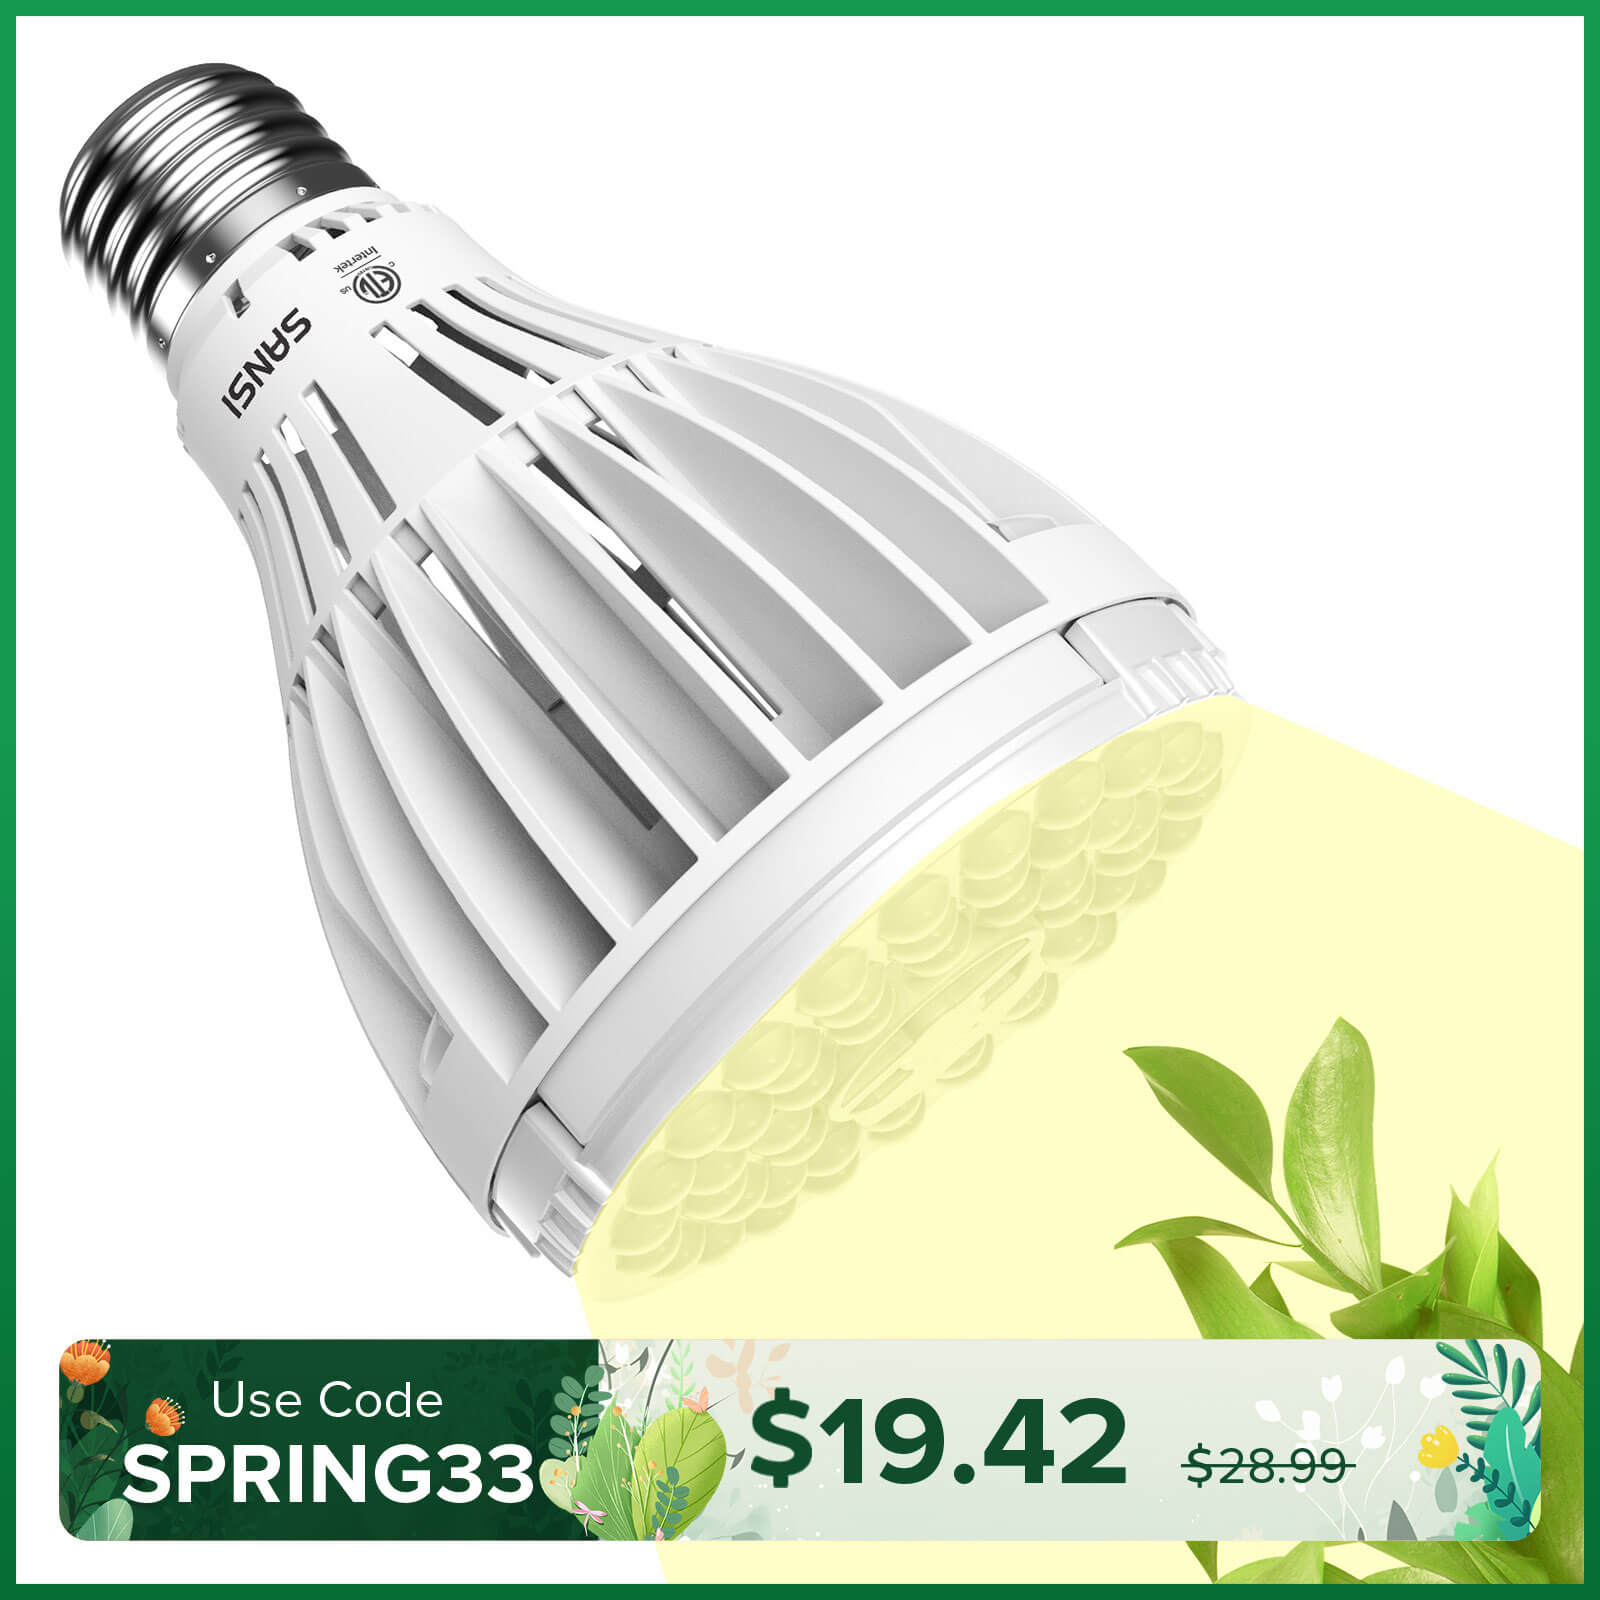 PAR25 24W LED Grow Light Bulb for Seeds and Greens(US ONLY)